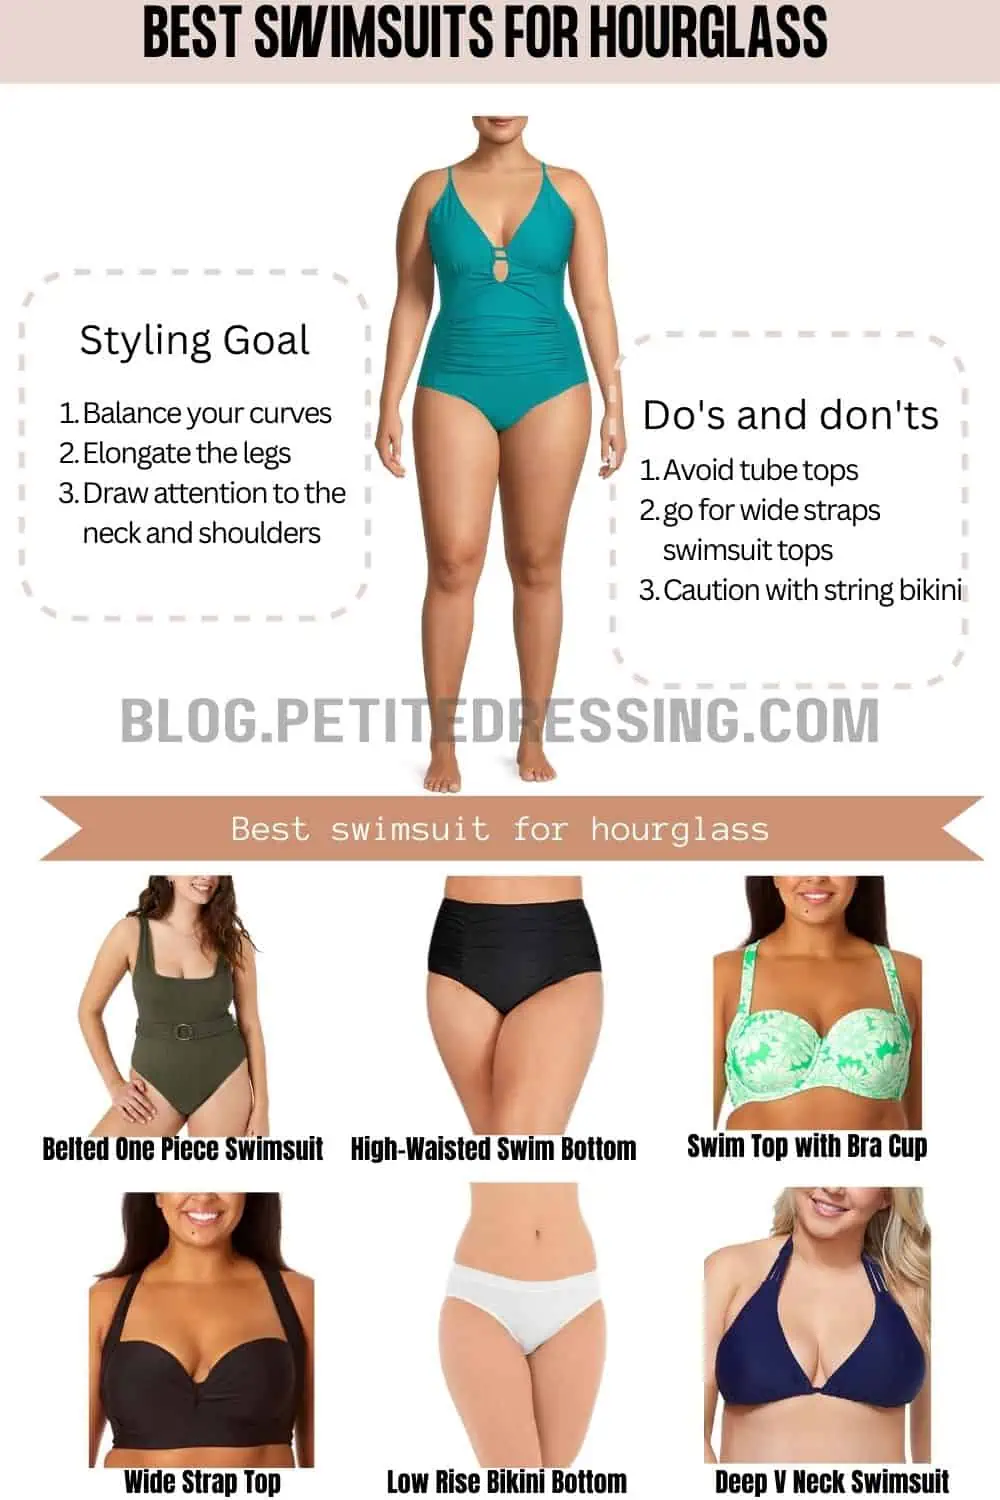 How to Find The Best Swimsuit for My Body Type